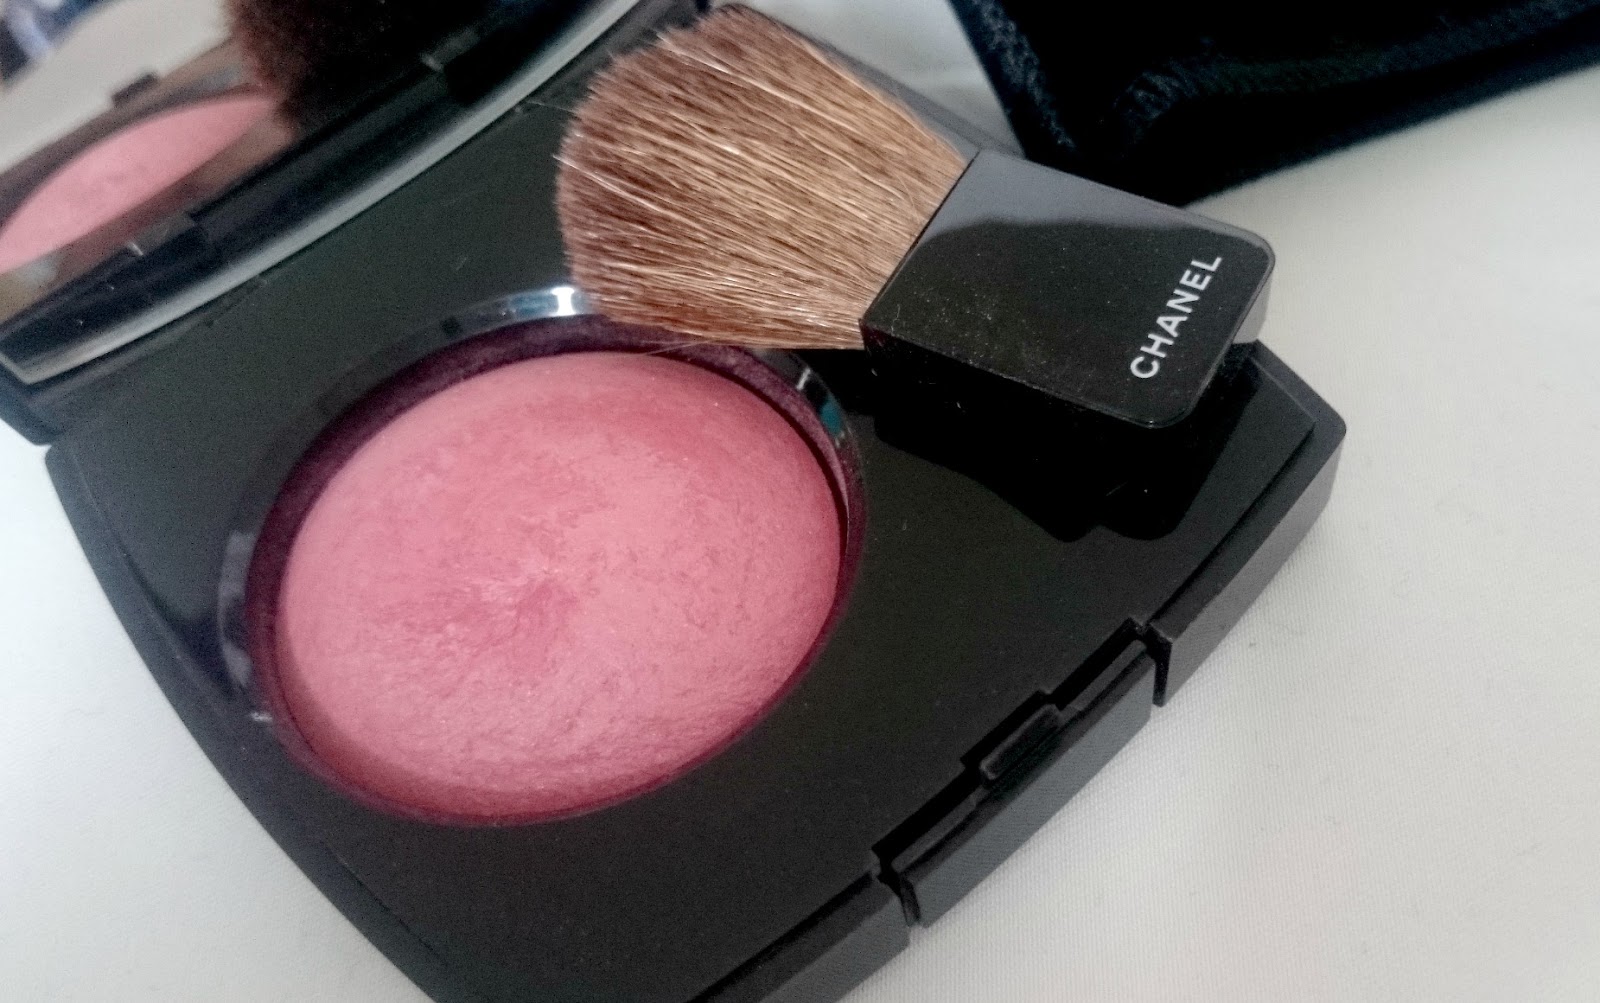 My Chanel Blush Collection